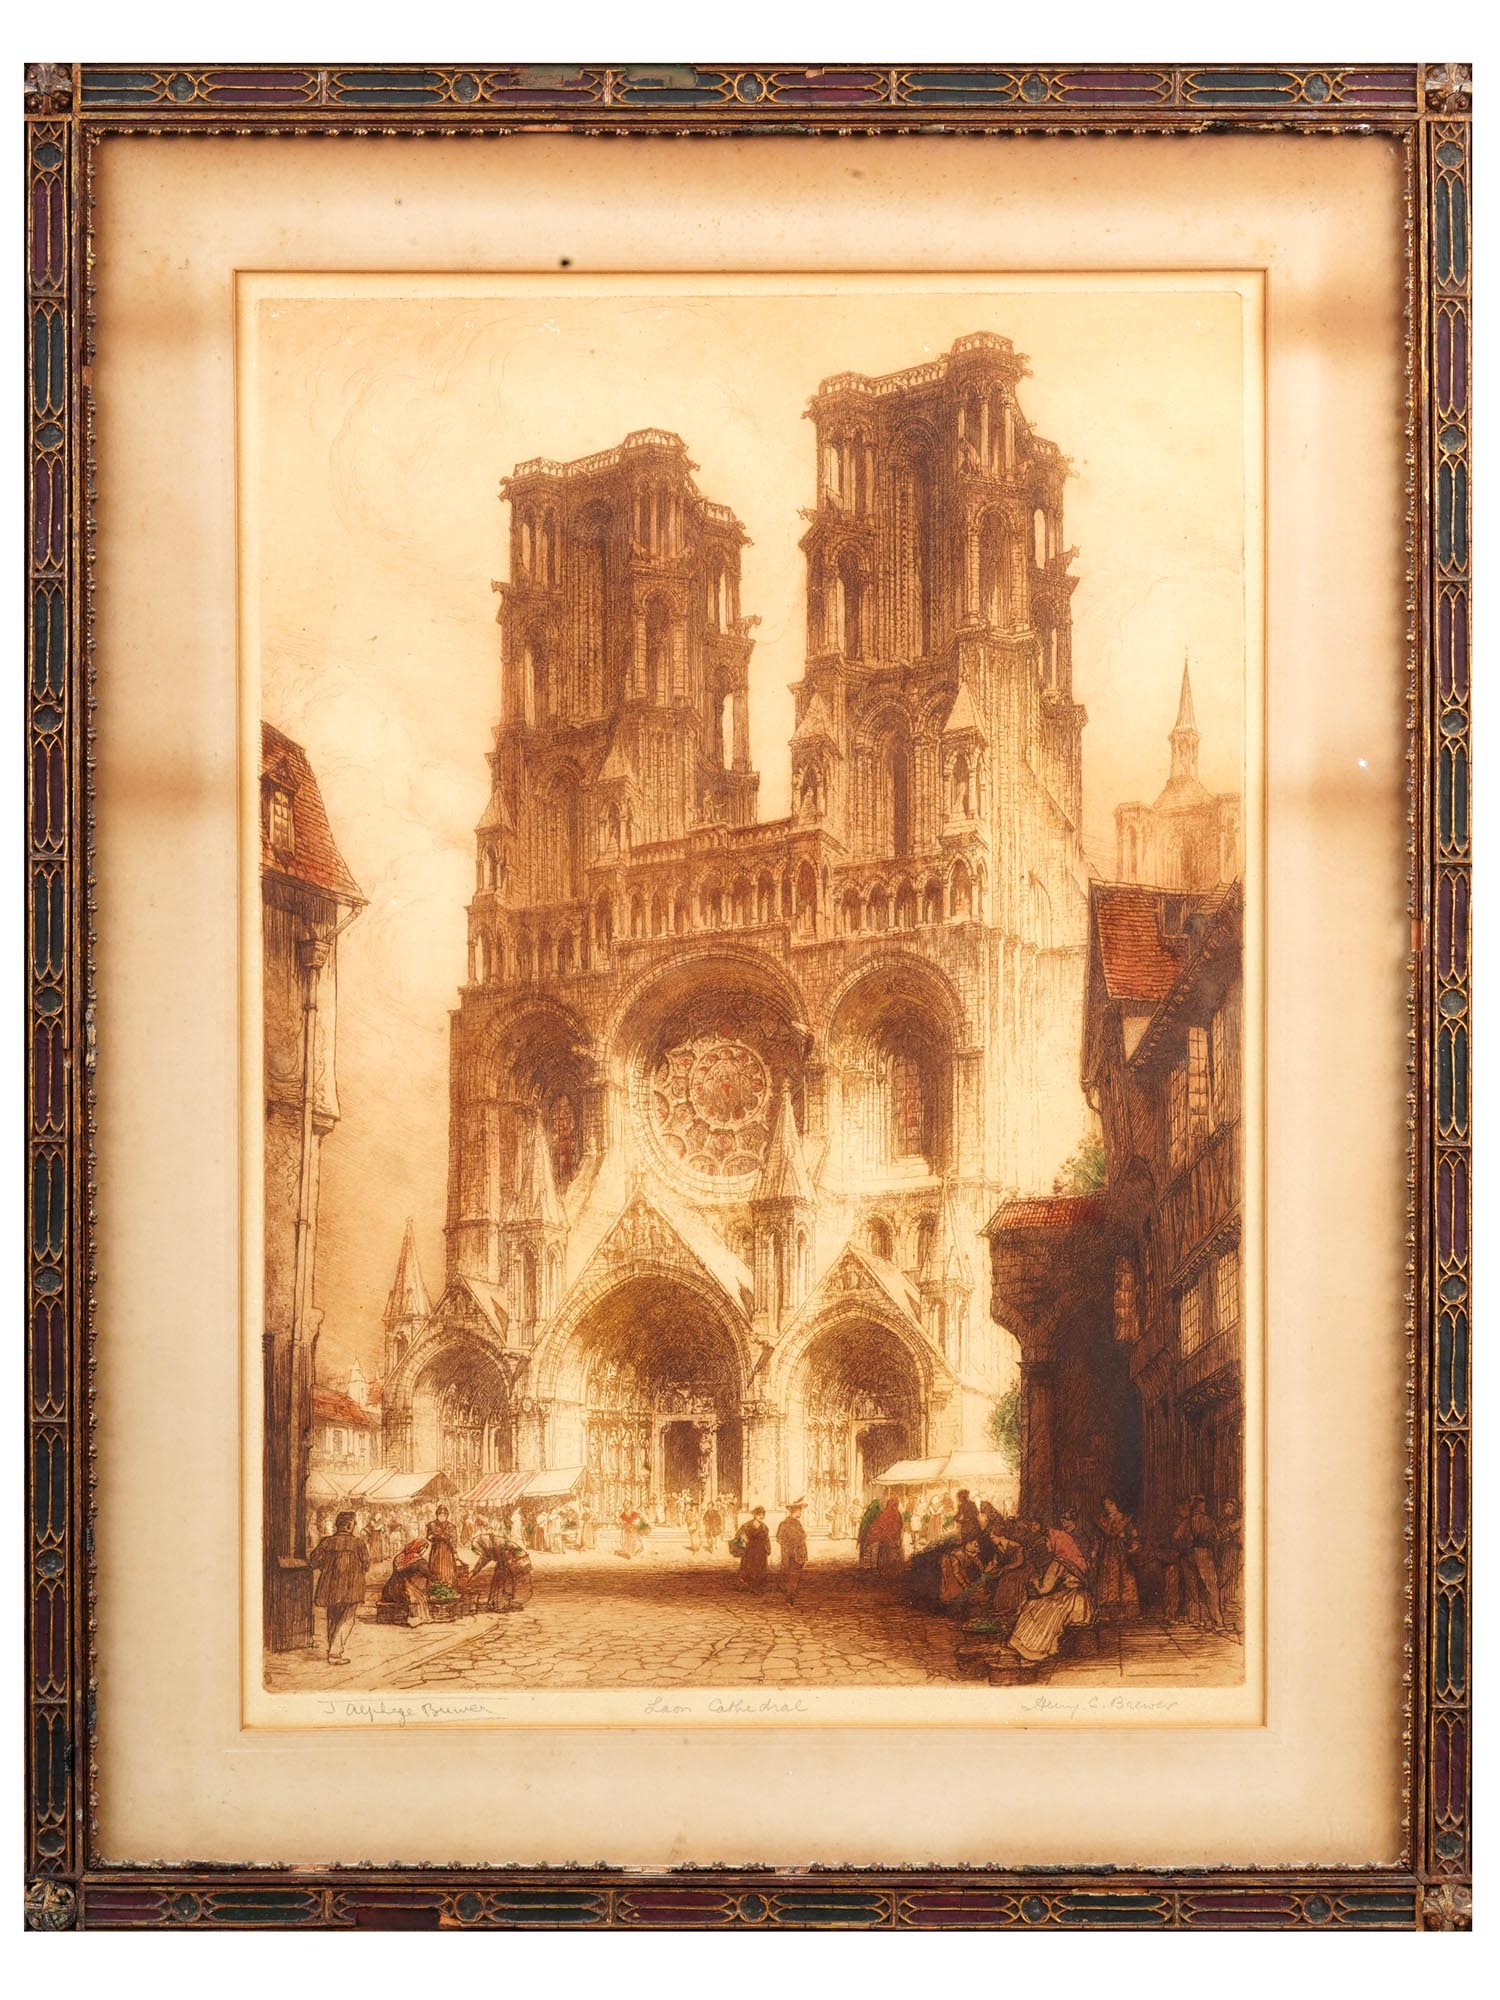 NOTRE DAME DE PARIS ETCHING BY JAMES AND HENRY BREWER PIC-0